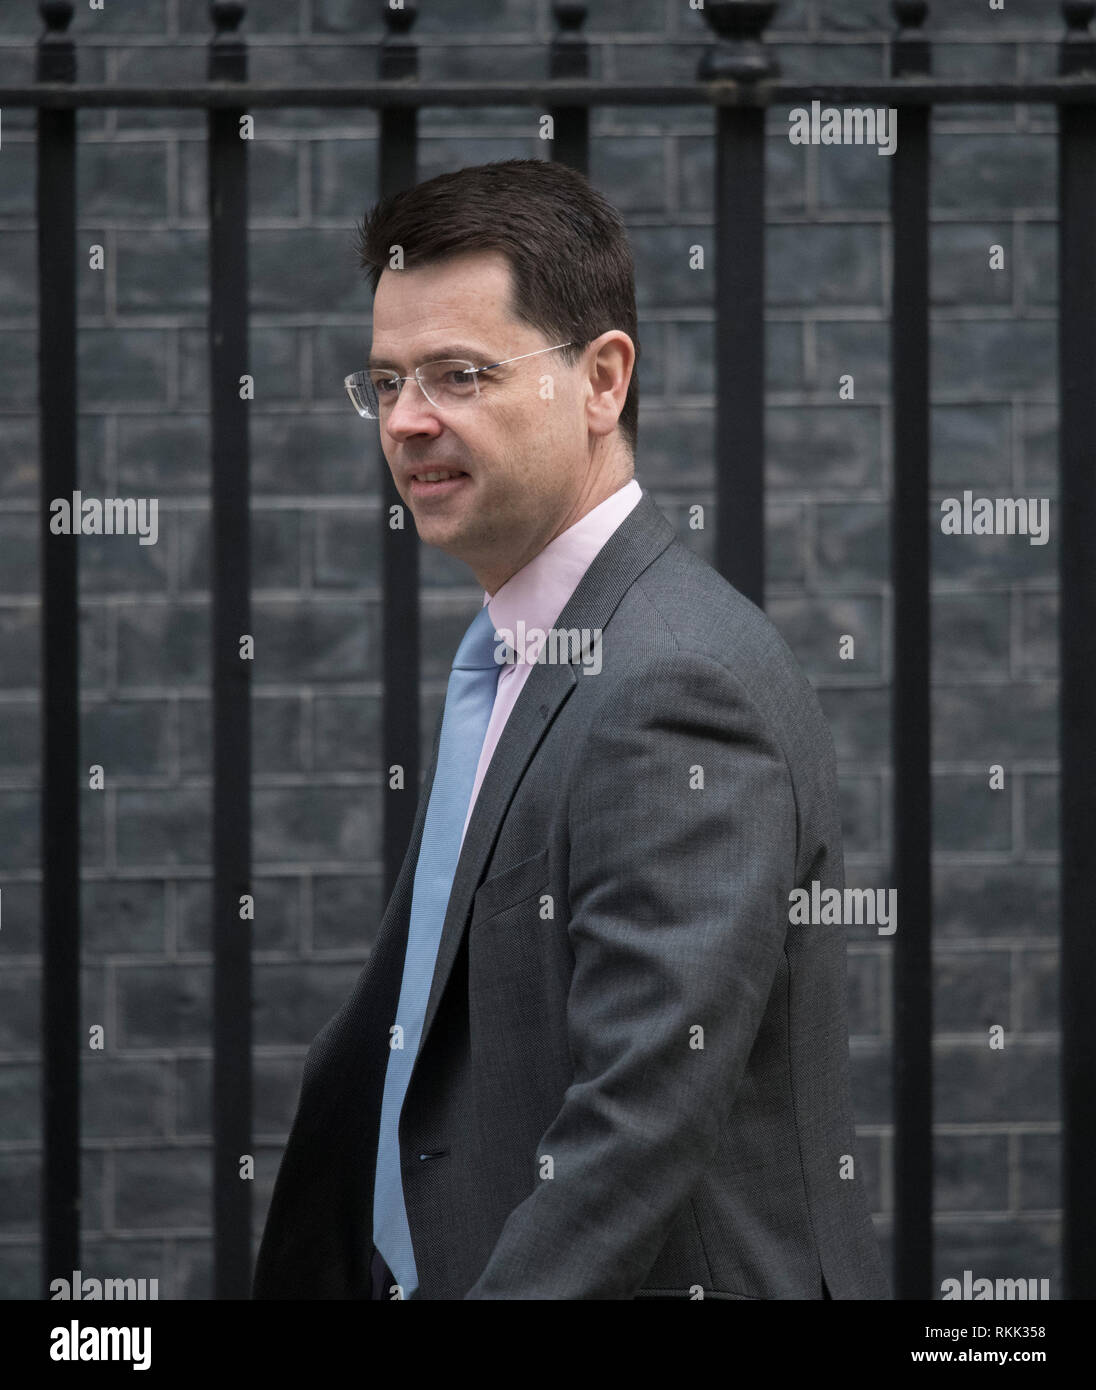 Downing Street, London, UK. 12 February 2019. Government Ministers arrive in Downing Street for weekly cabinet meeting. Credit: Malcolm Park/Alamy Live News. Stock Photo